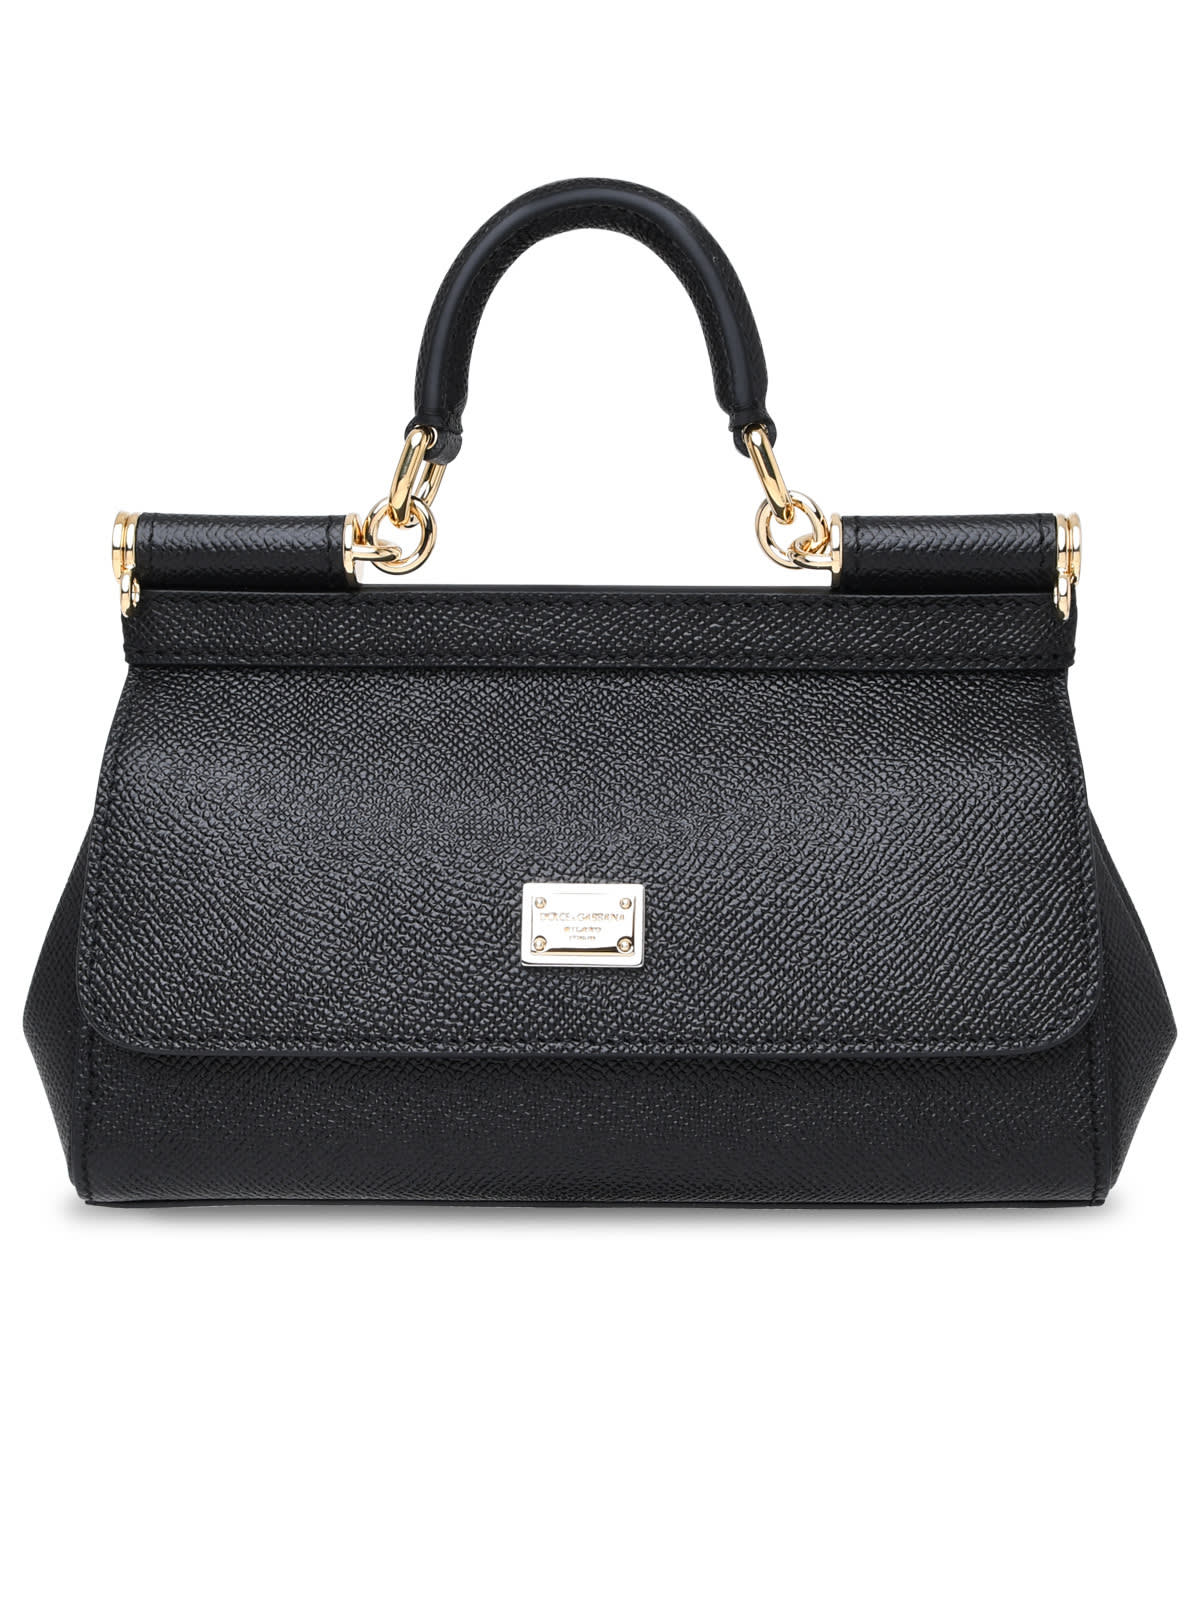 Totes bags Dolce & Gabbana - Sicily small leather bag - BB7116A100180001